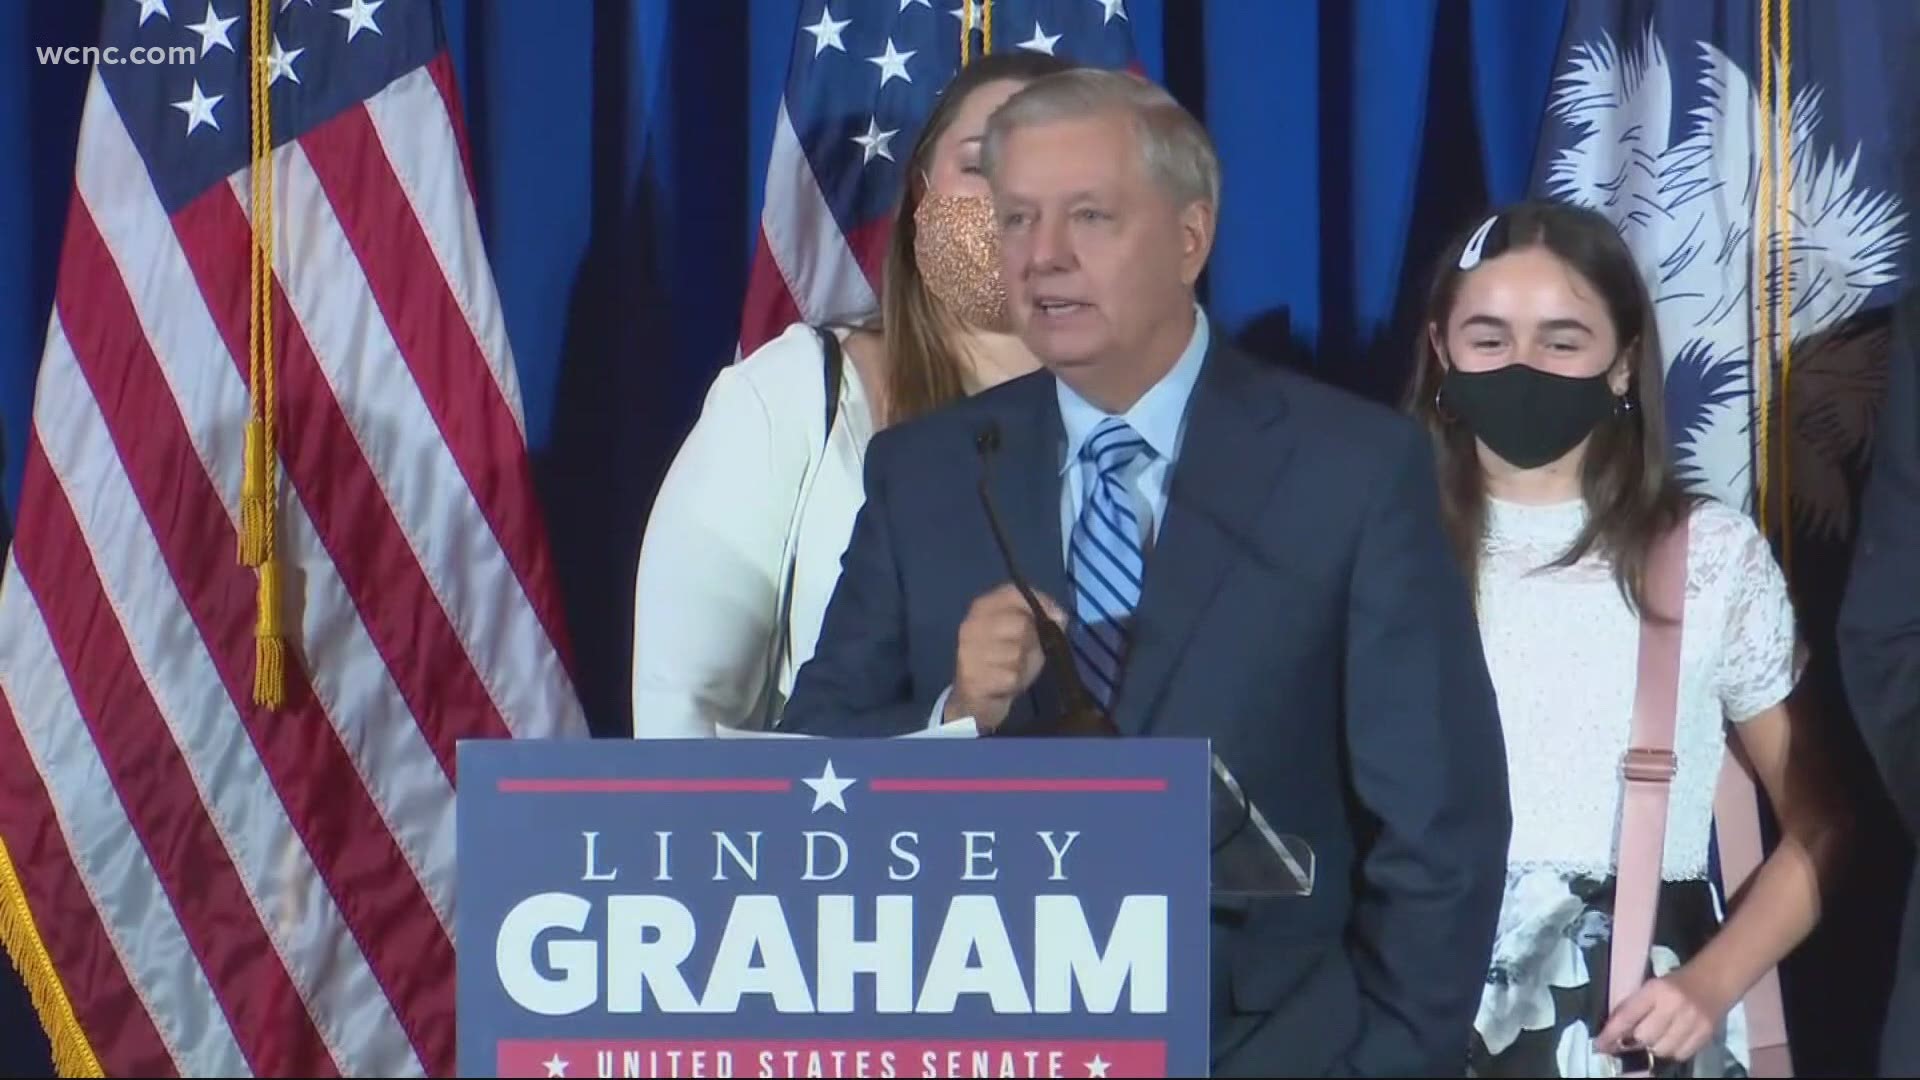 South Carolina Republican Lindsey Graham defeated Democrat Jaime Harrison in the battle for the state's US Senate seat on Election Day 2020.